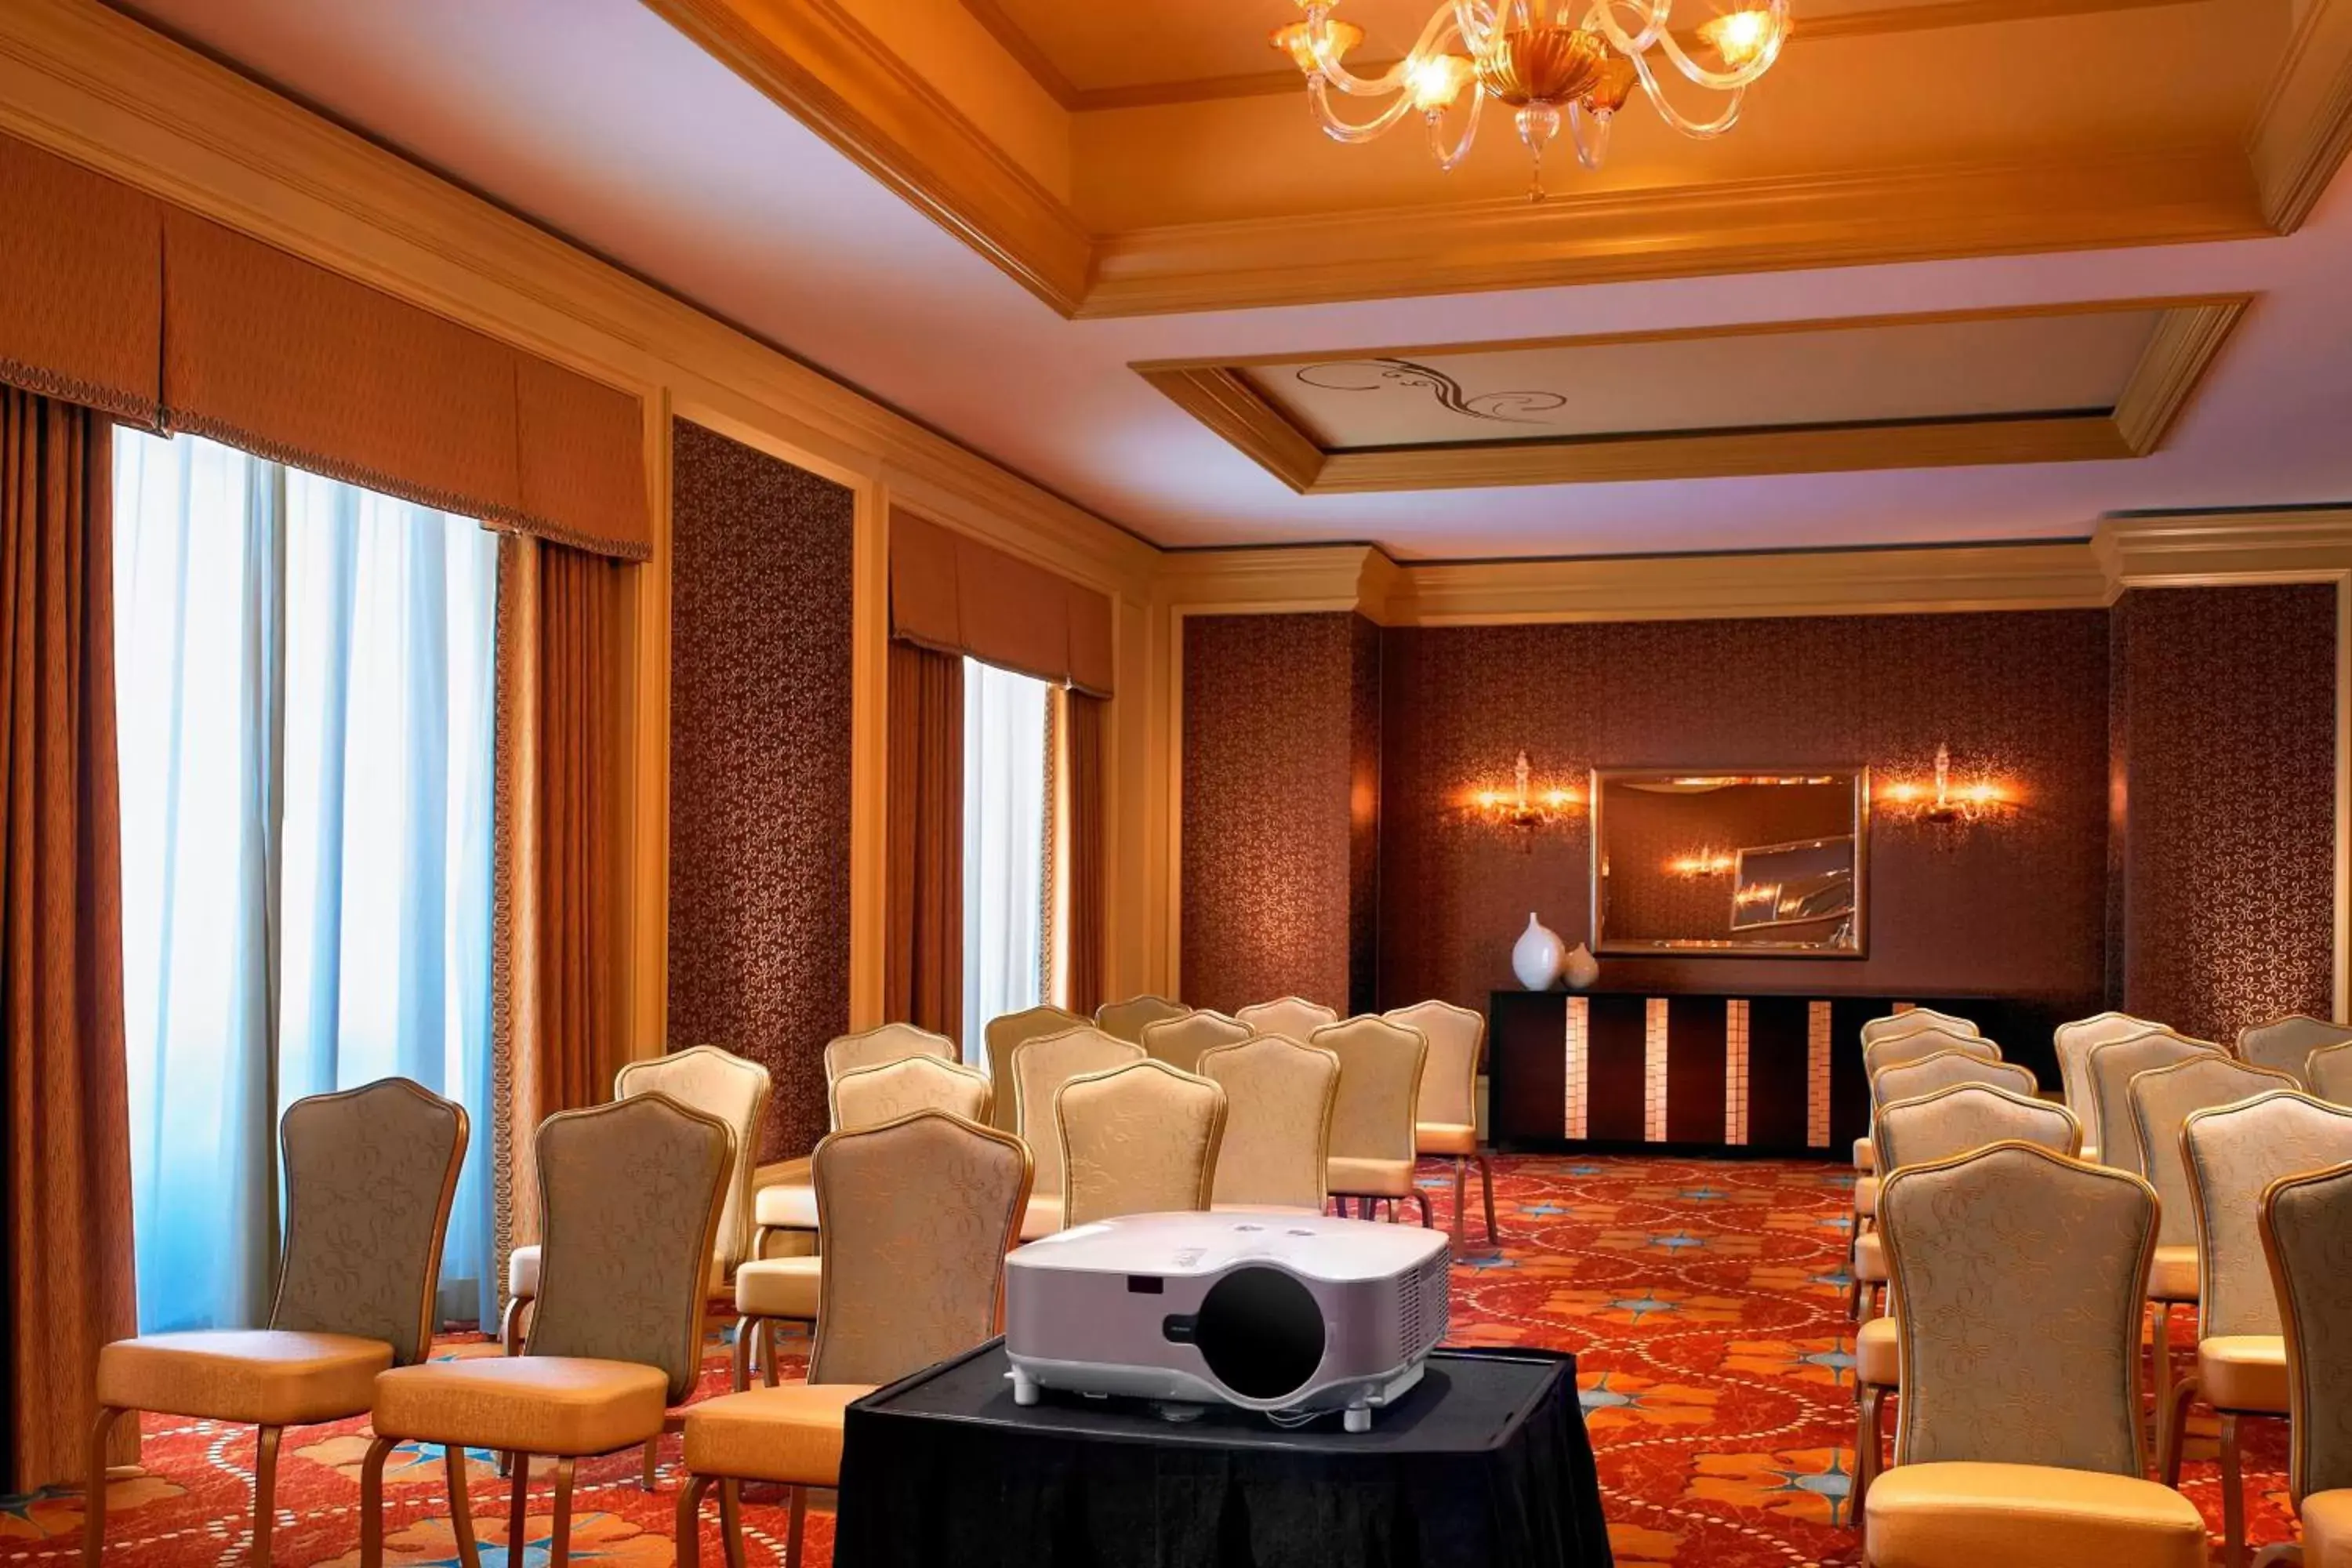 Meeting/conference room, Banquet Facilities in The St. Regis Houston